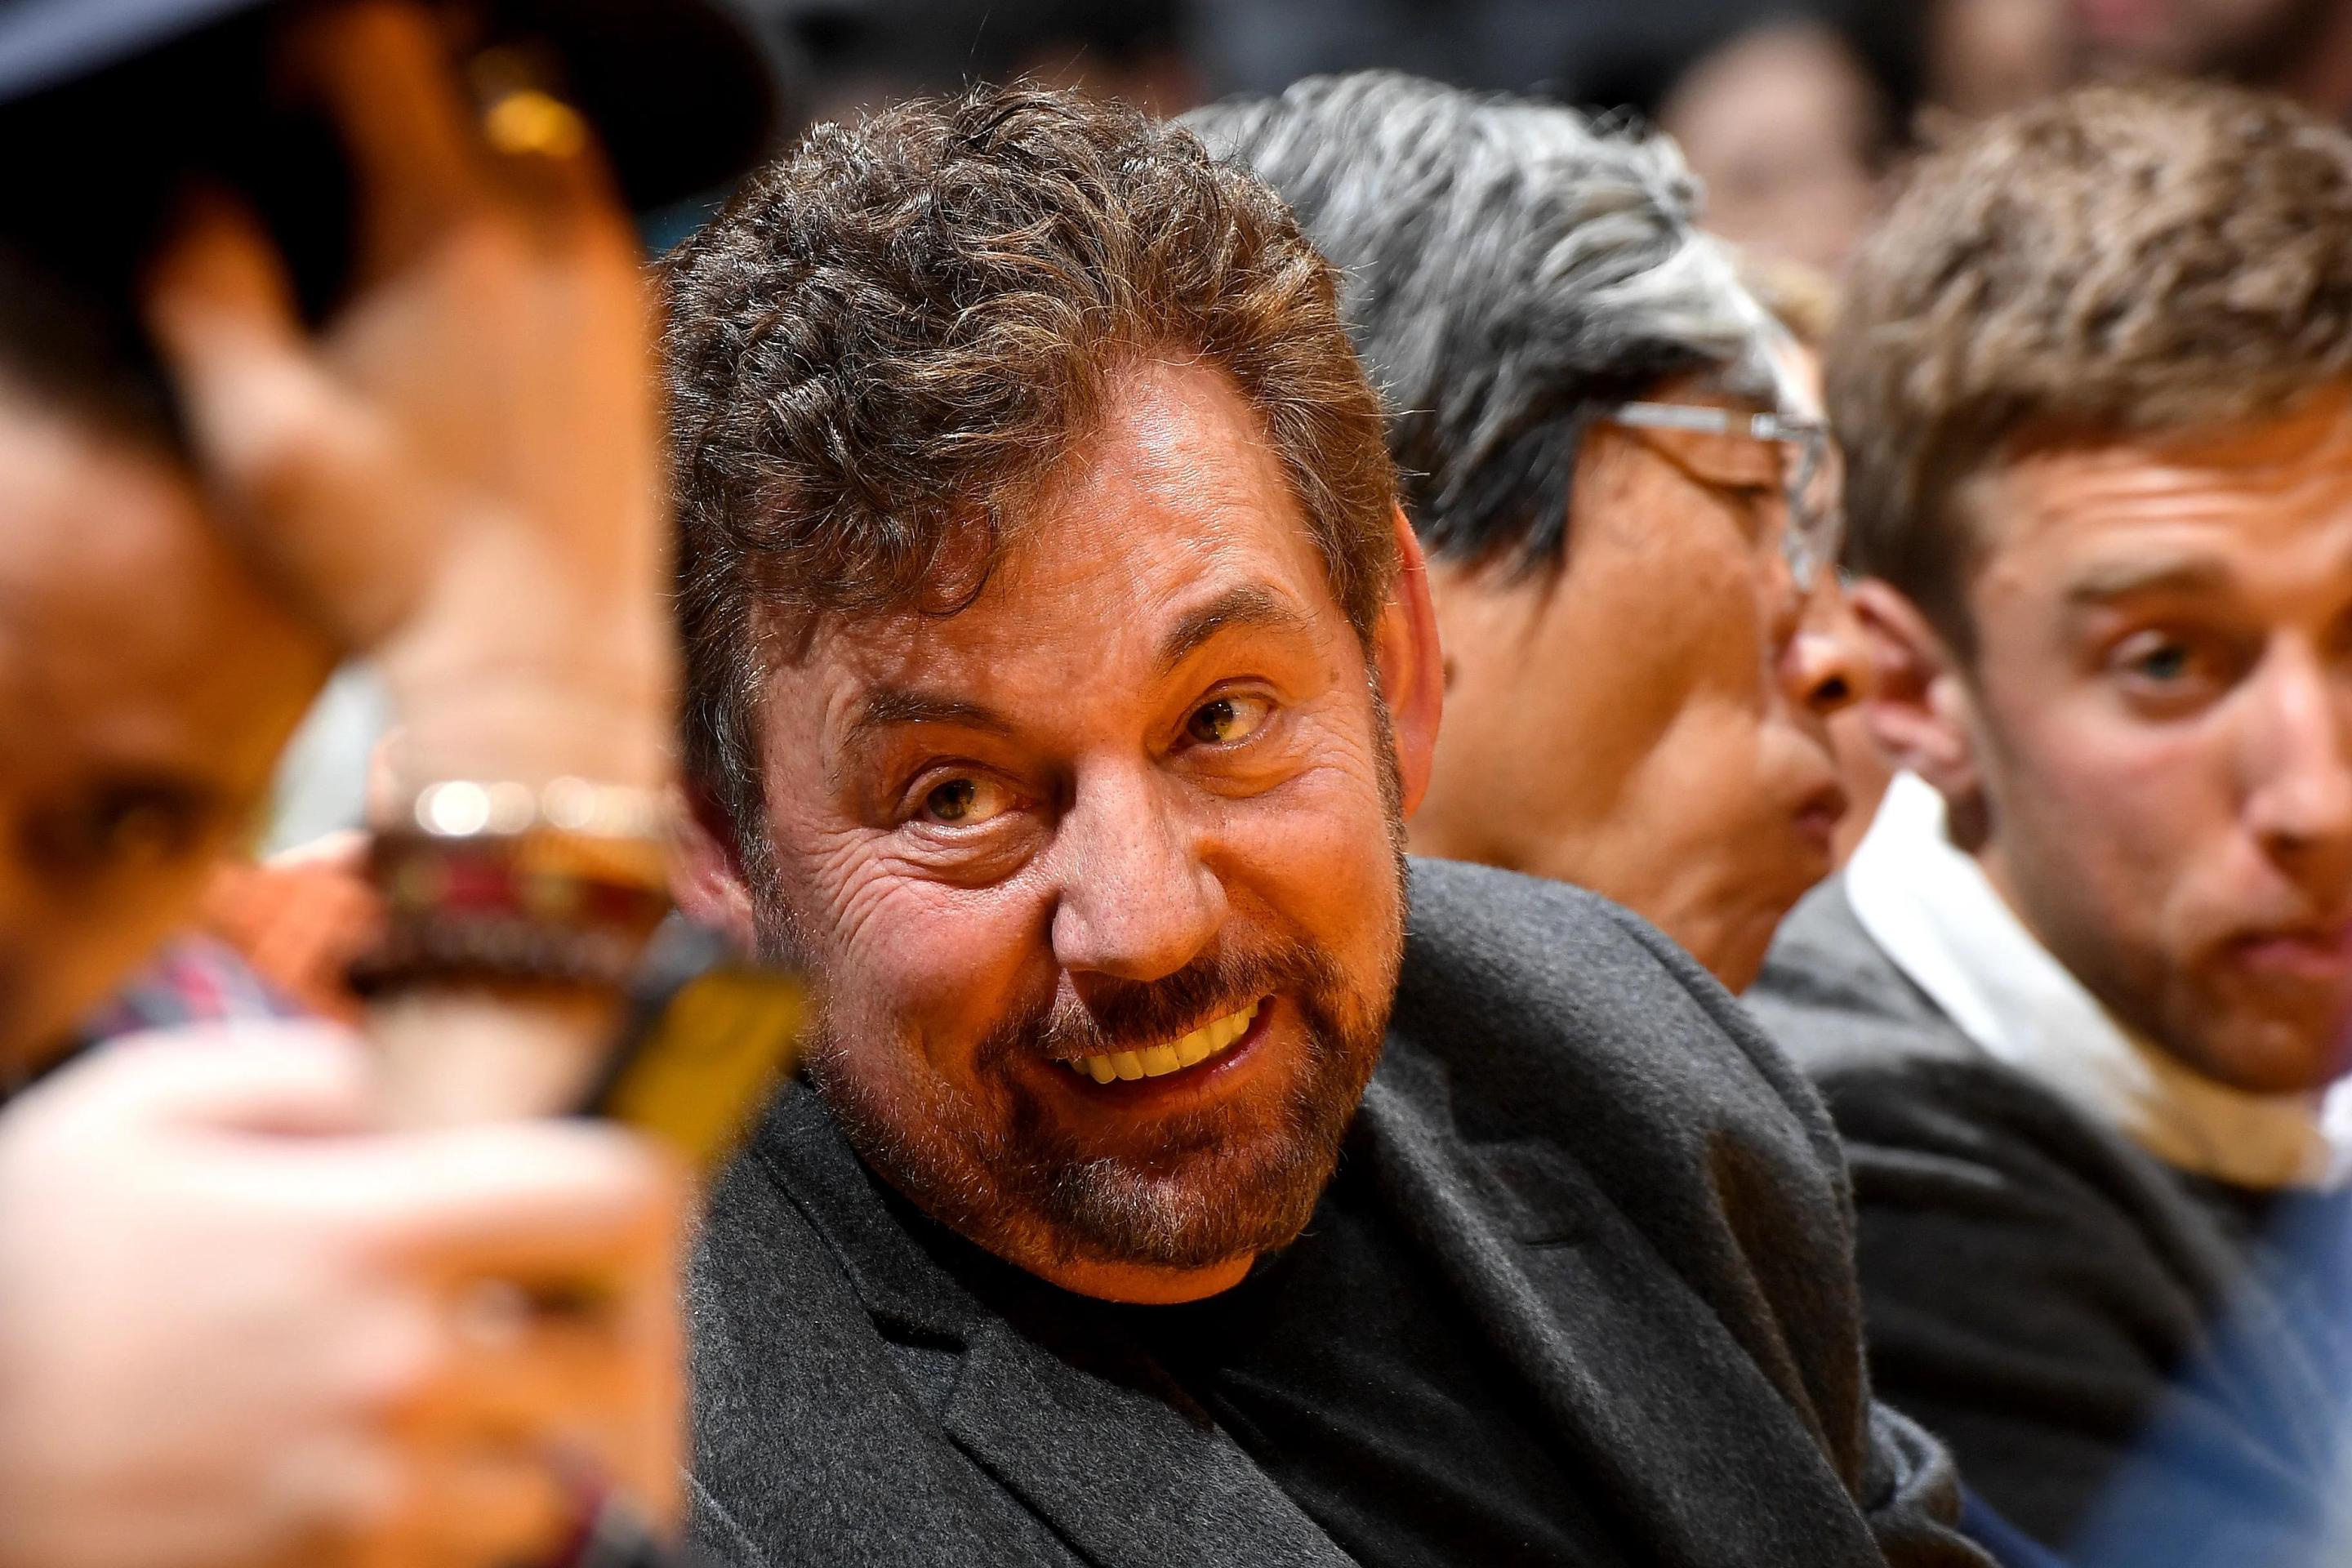 Knicks owner James Dolan, seen here leering weirdly at a Knicks/Lakers game in 2019. He has a goatee.